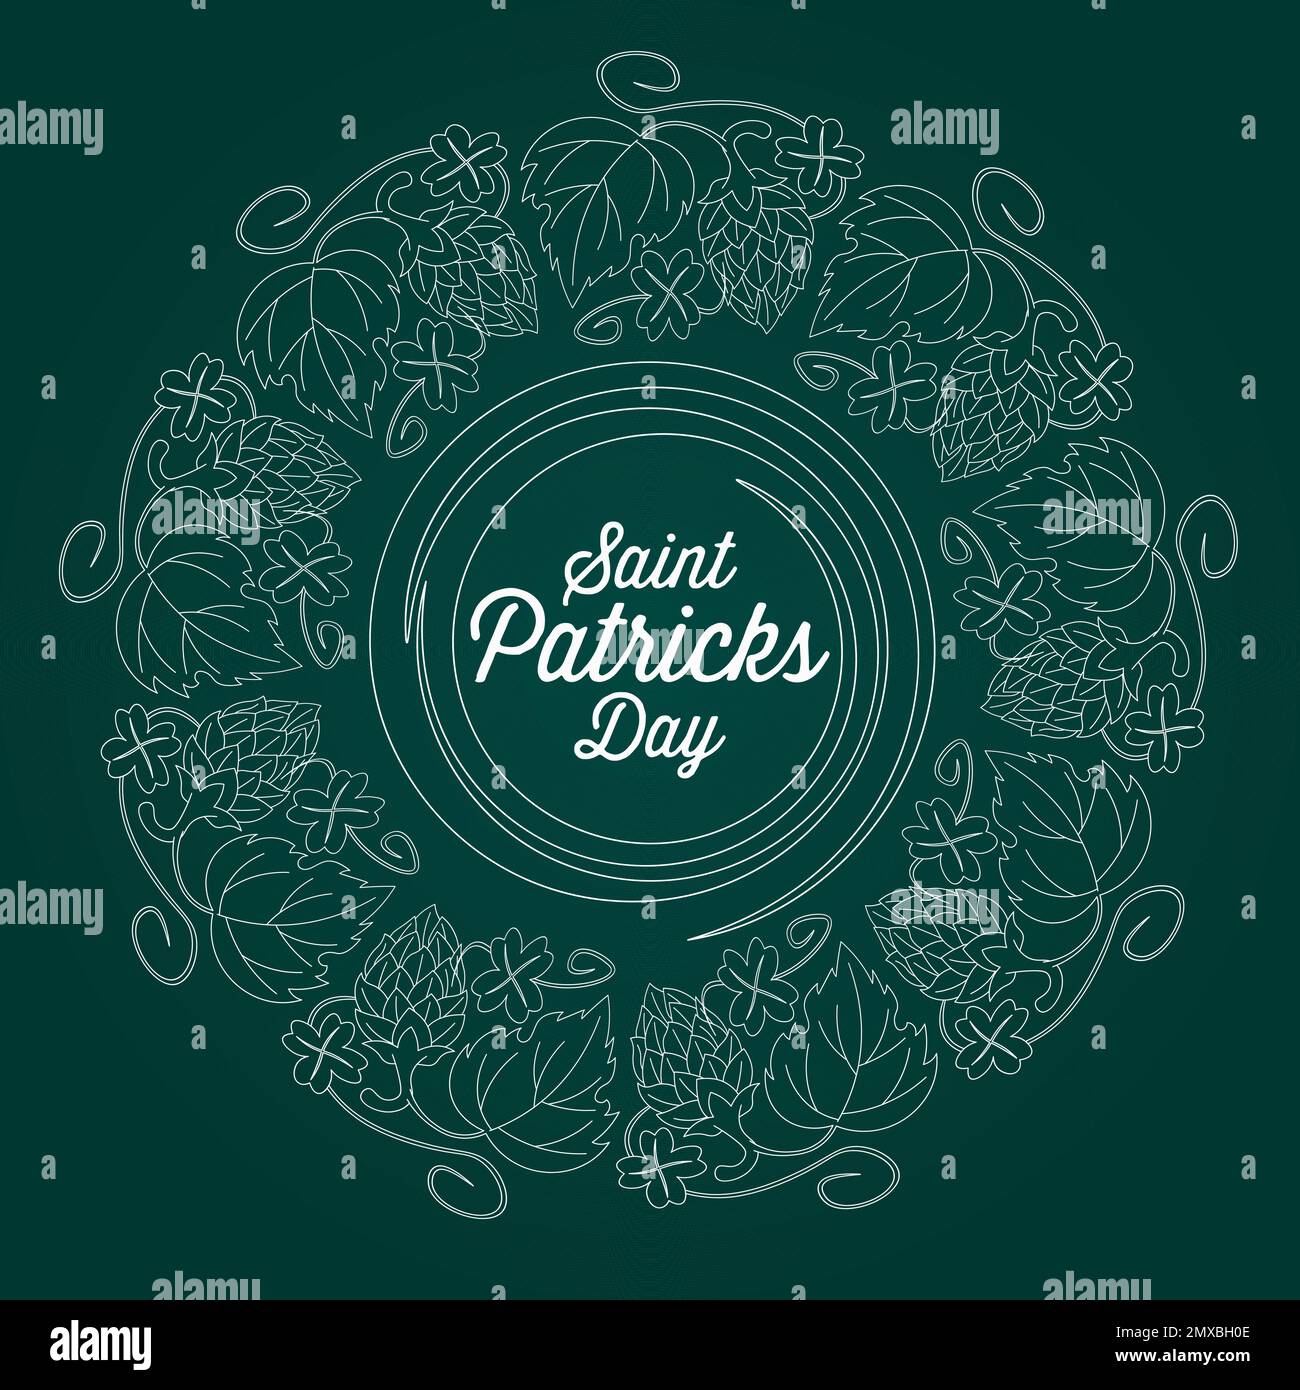 saint patricks day background with abstract elements of hops and shamrocks inflorescence Stock Vector